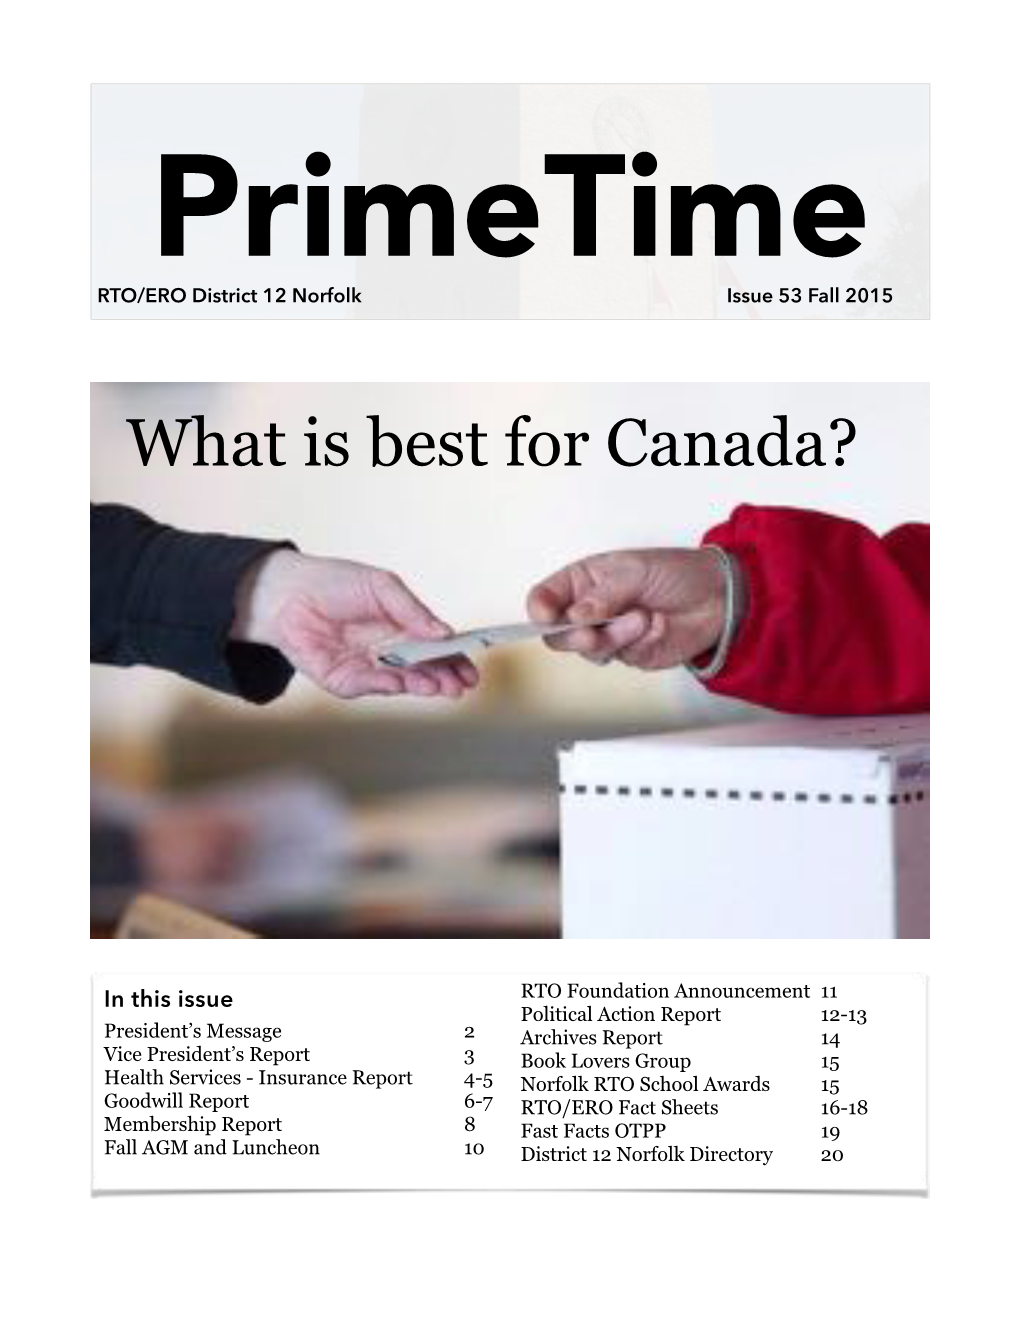 What Is Best for Canada?